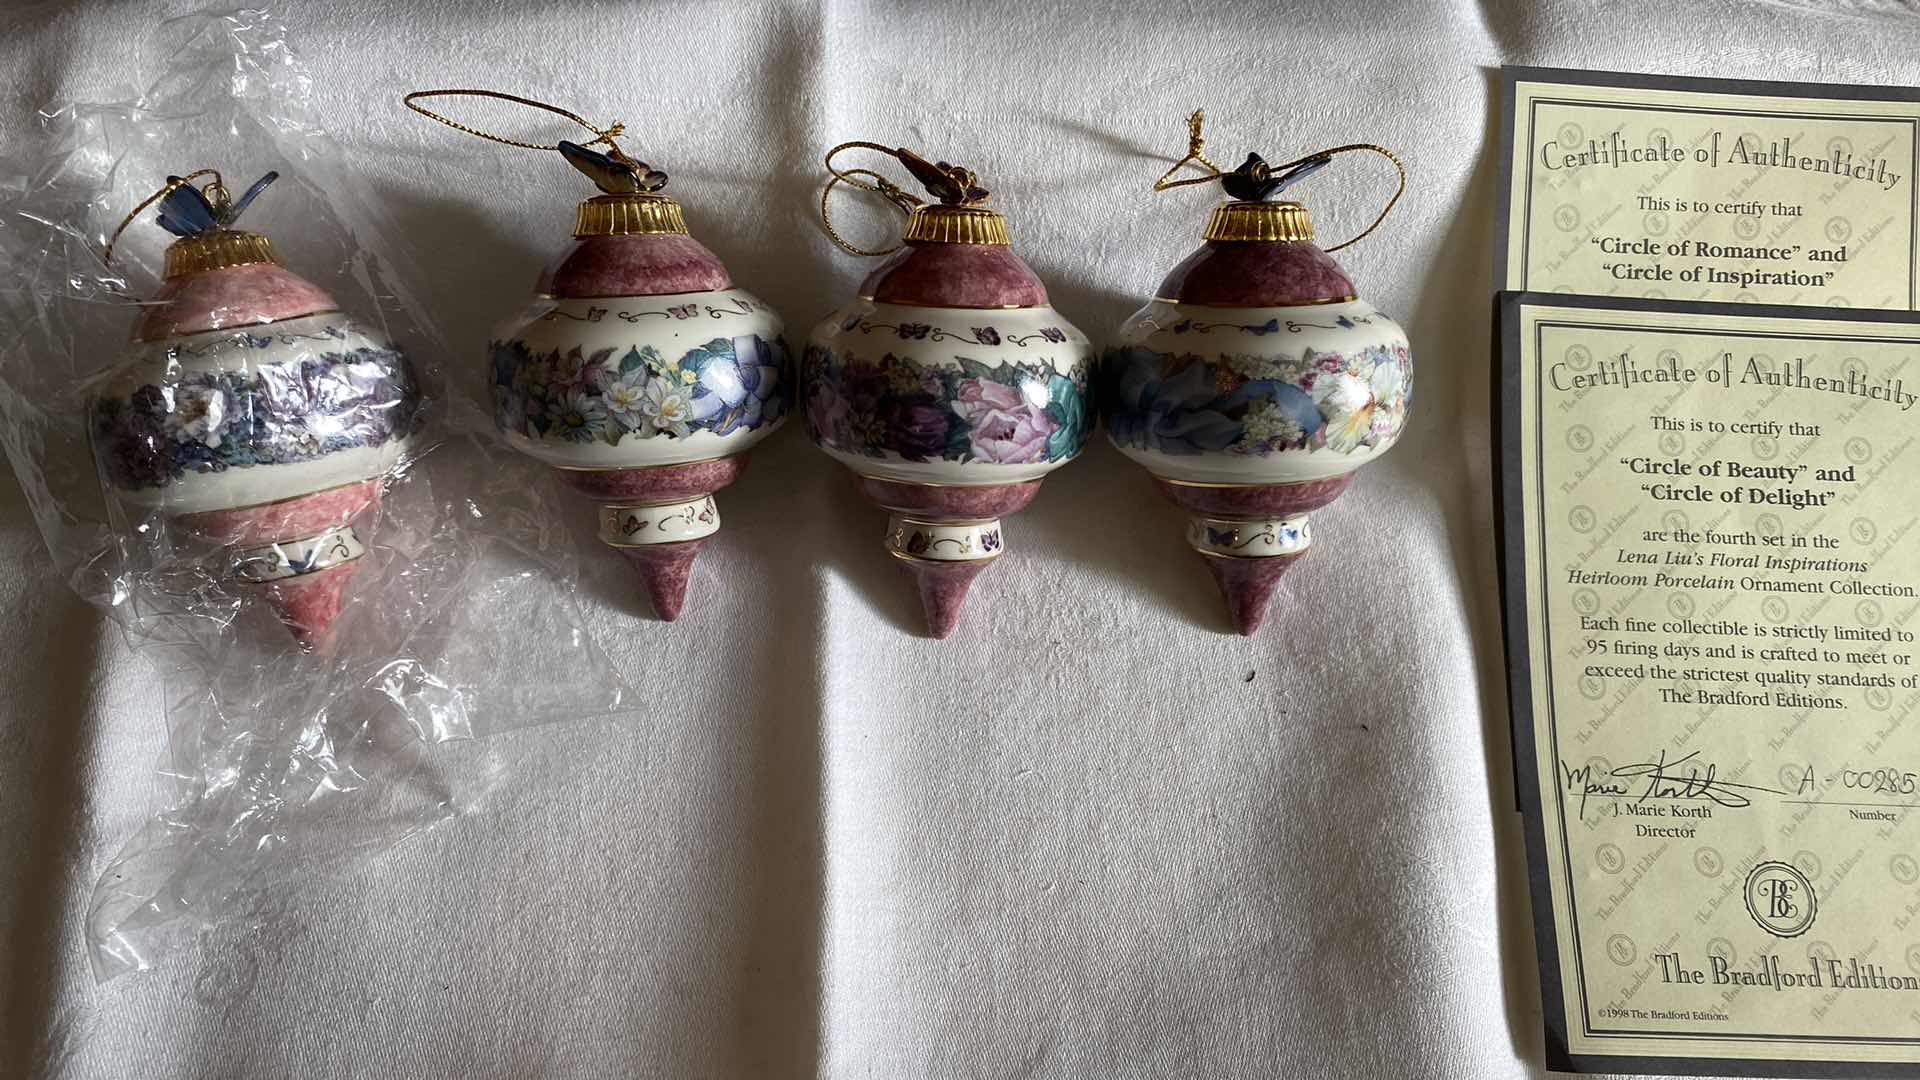 Photo 1 of VINTAGE FOUR LENA LIU’s FLORAL INSPIRATIONS PORCELAIN ORNAMENTS COLLECTIBLES BY BRADFORD EXCHANGE WITH 2 CERTIFICATE OF AUTHENTICITY (Pattern on certificate may not be correct)